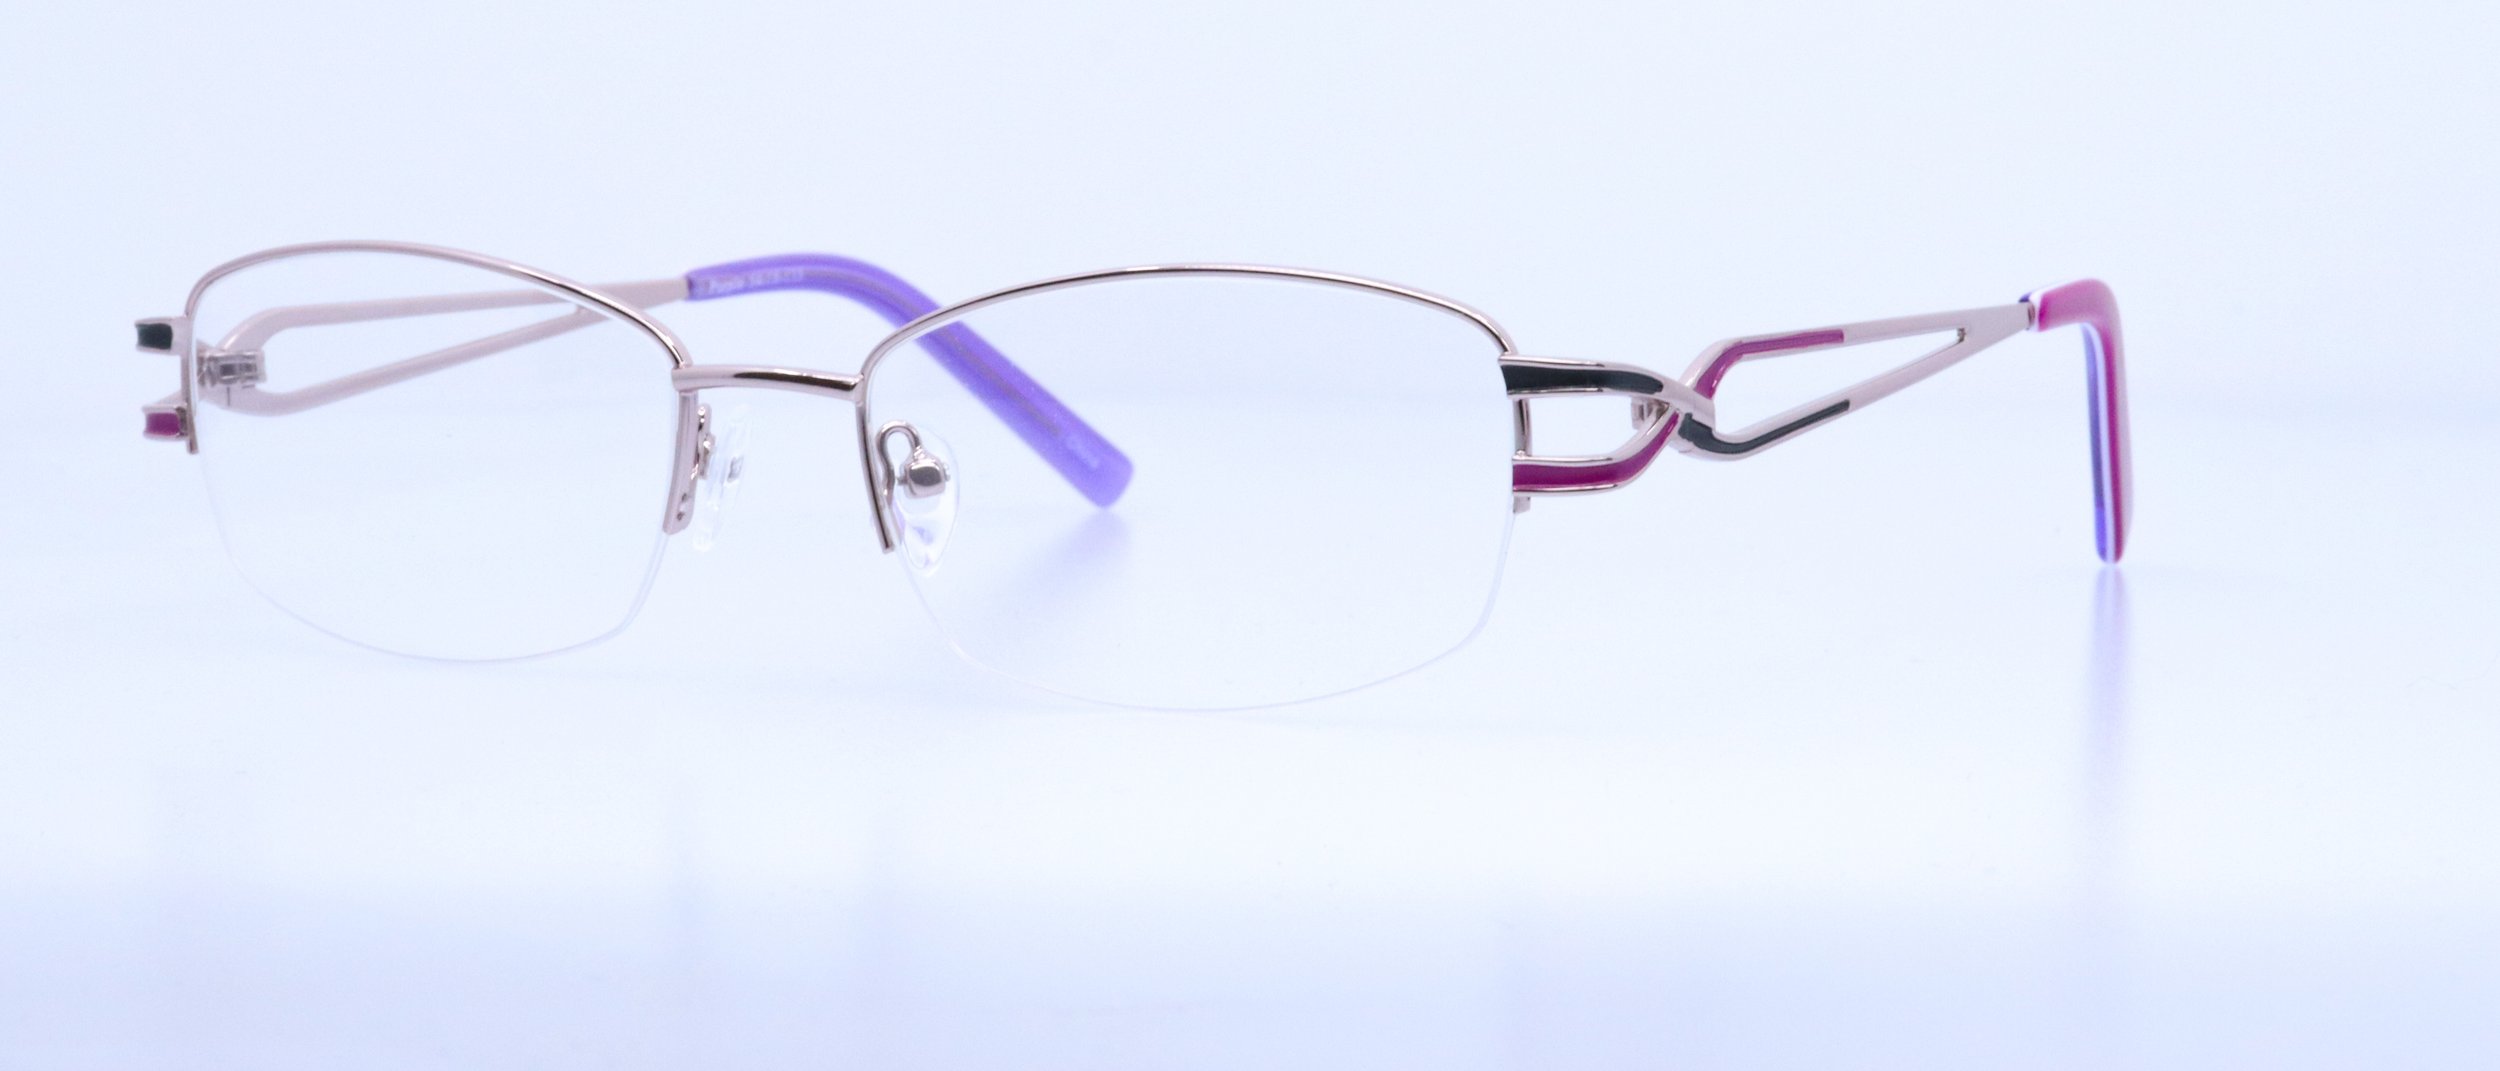  CC700: 54-18-135, Available in Brown or Purple  